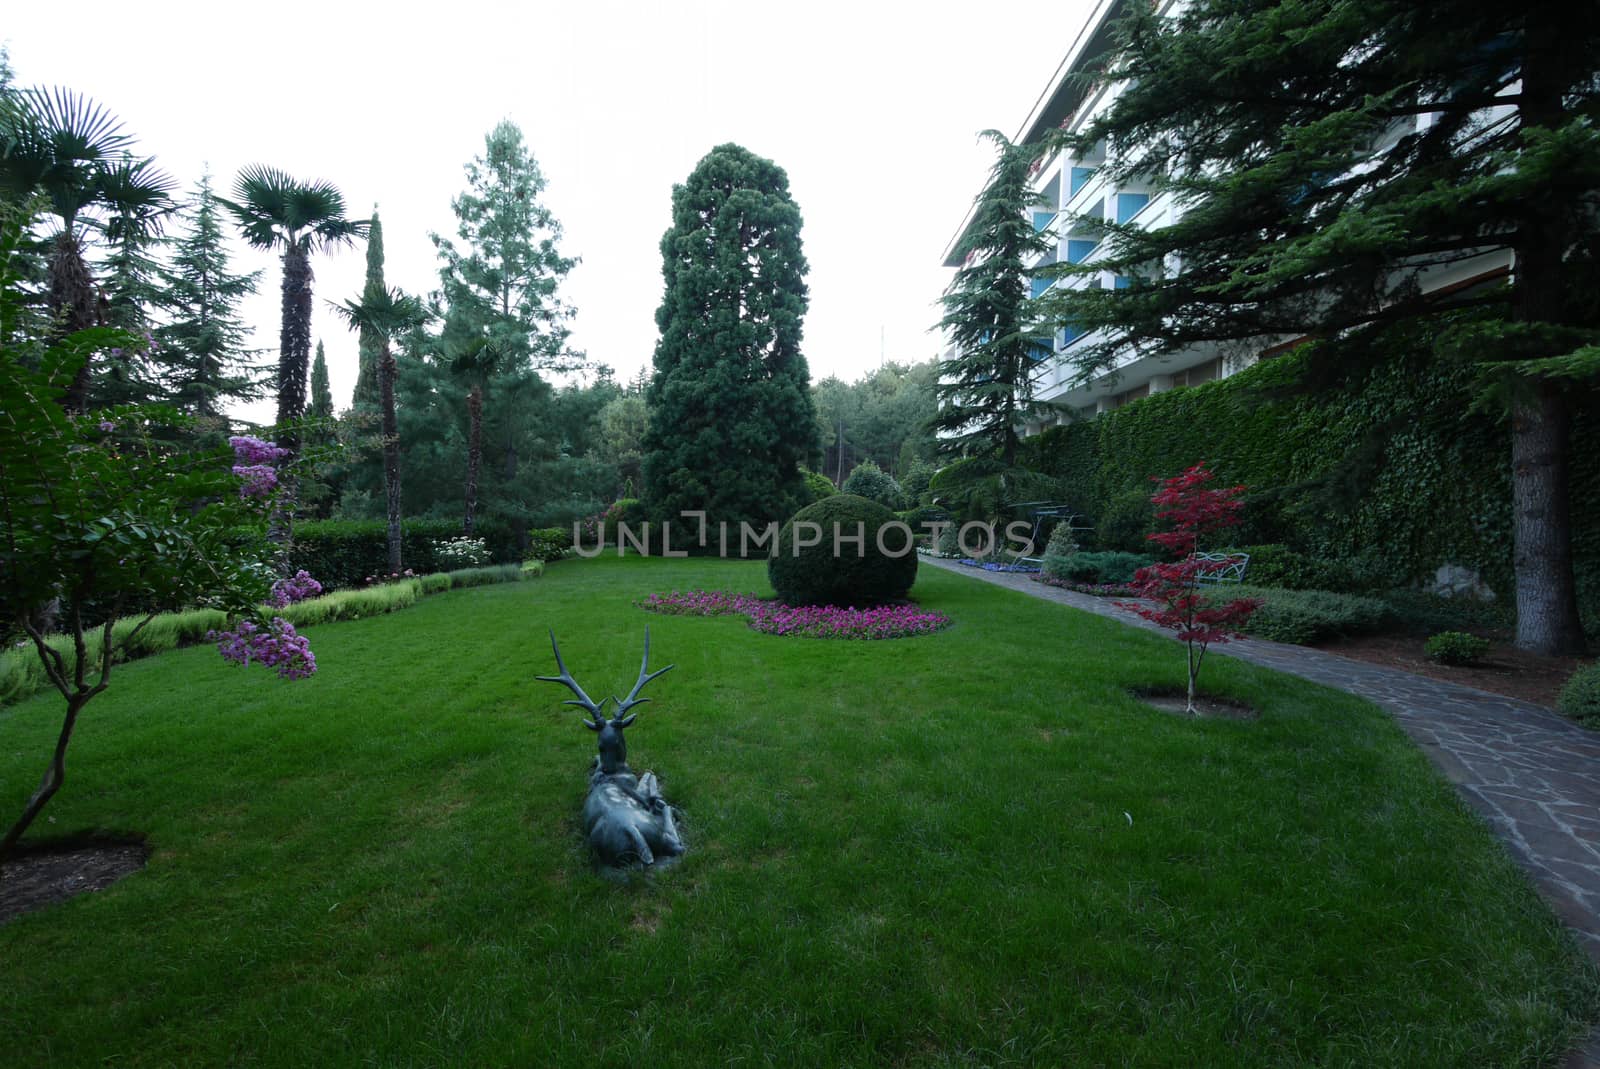 Statue of a deer on a lawn among a flower bed and trees by Adamchuk